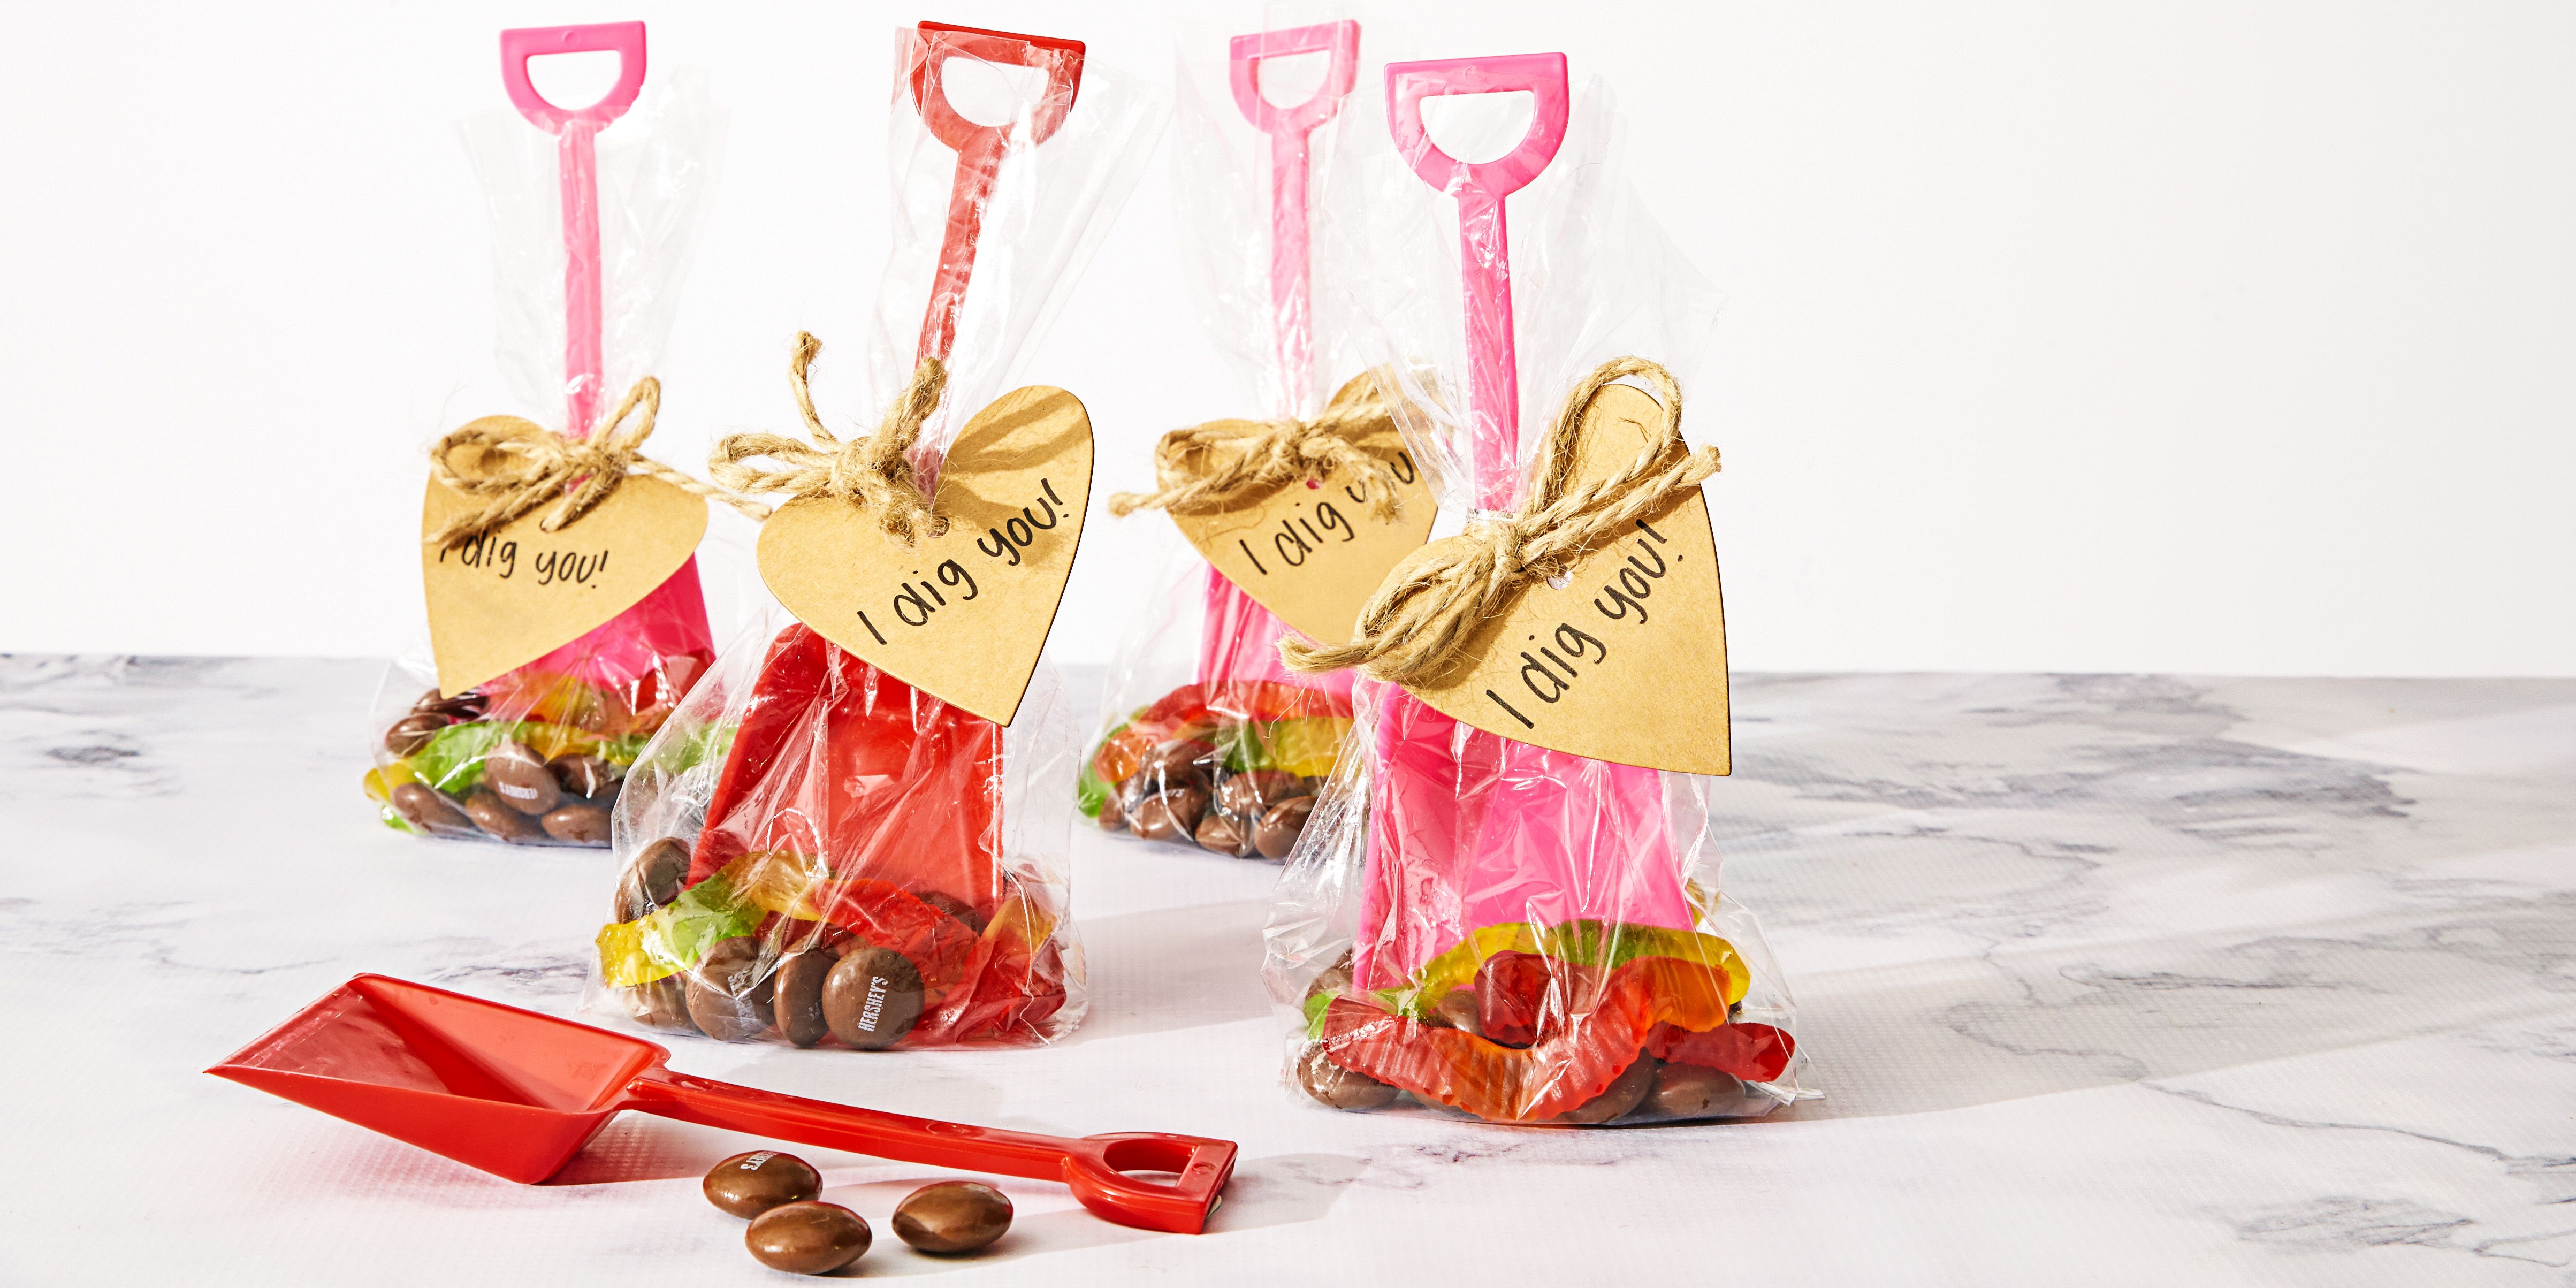 Cute Valentine's Day Goodie Bags